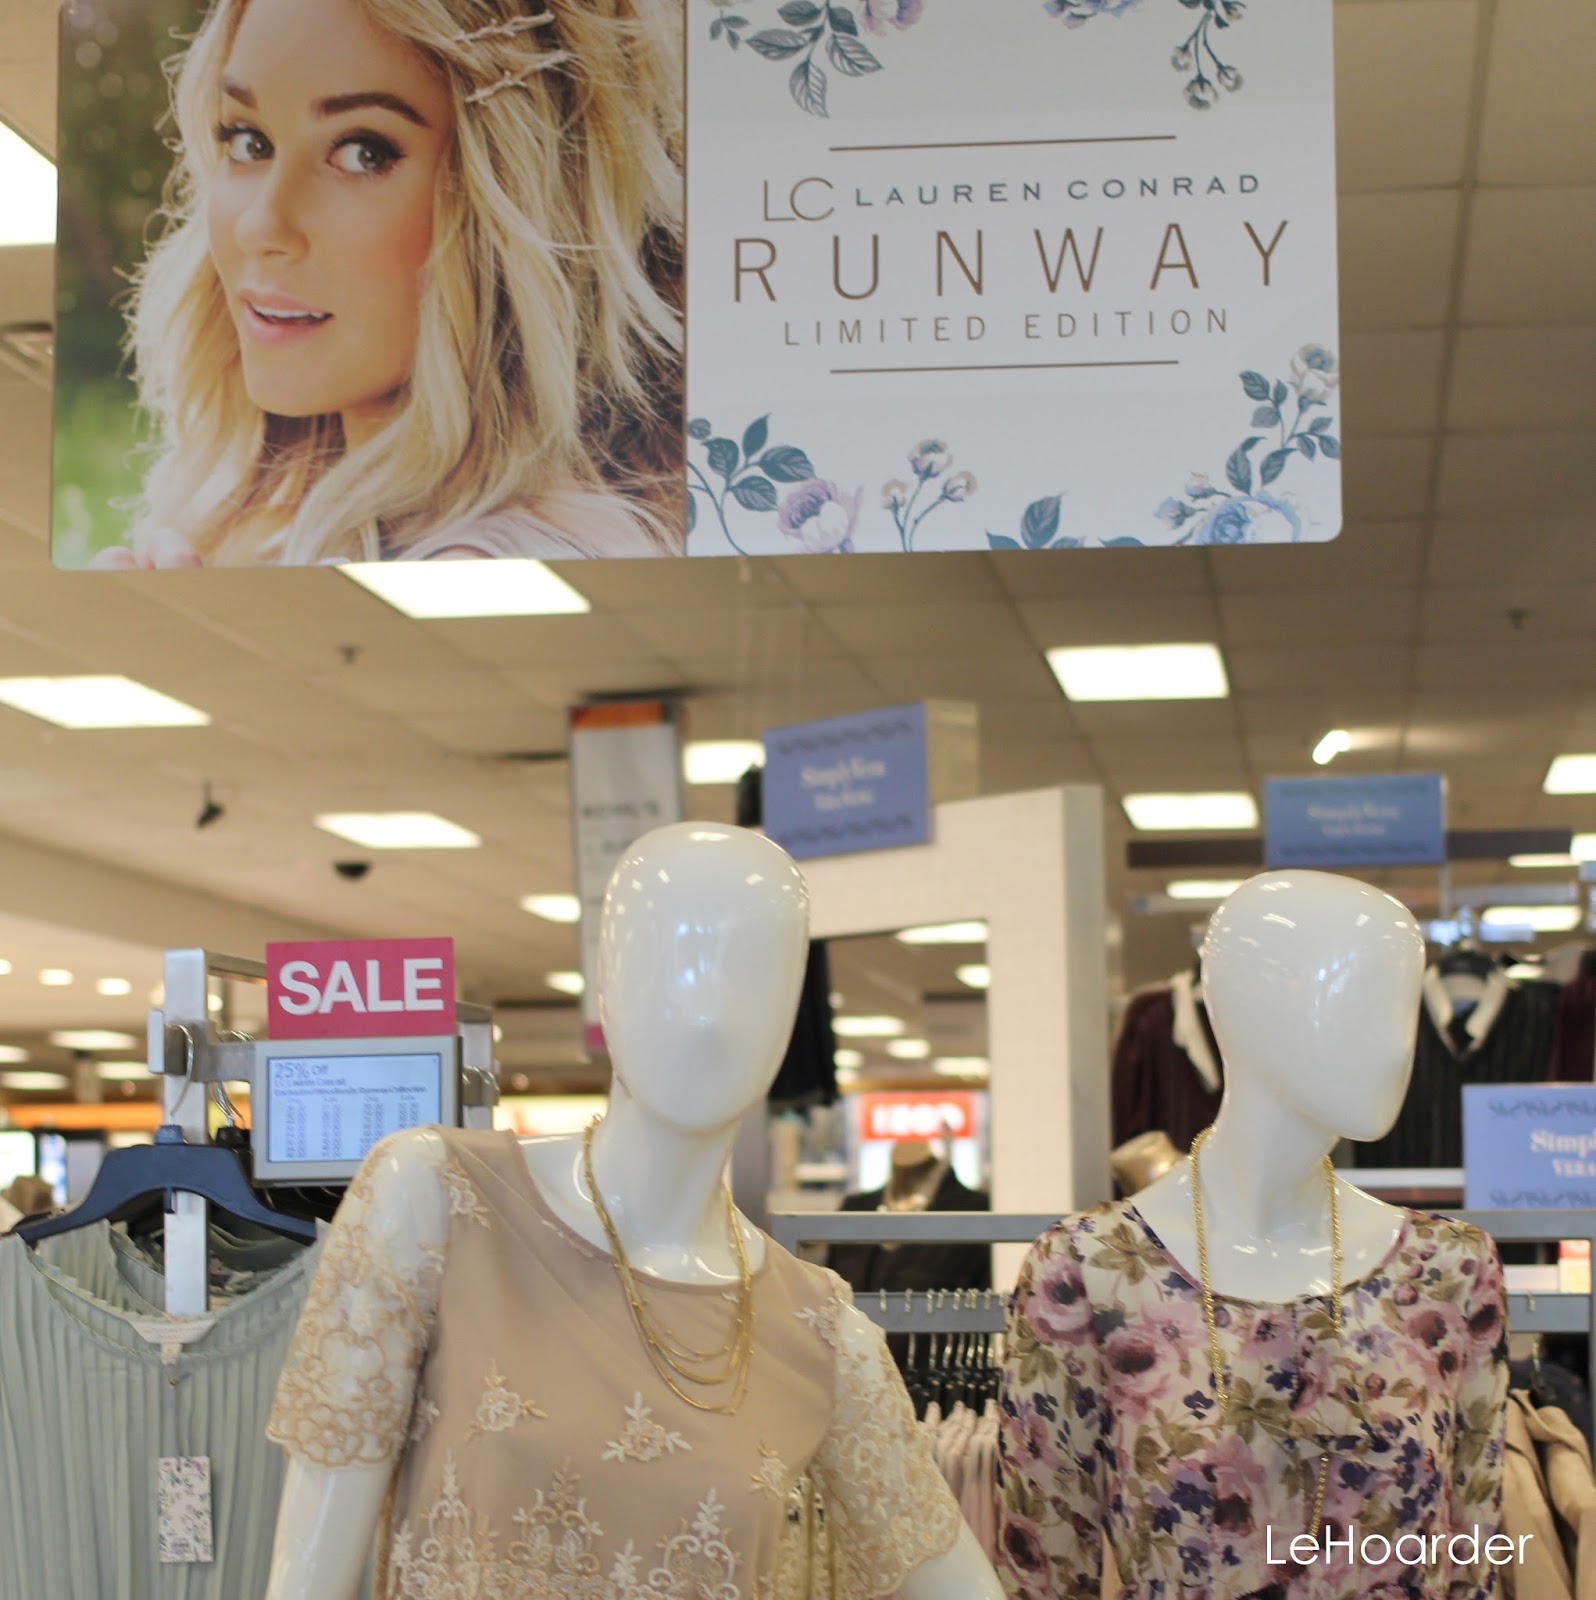 LC Lauren Conrad Runway Collection at Kohls - what you need right